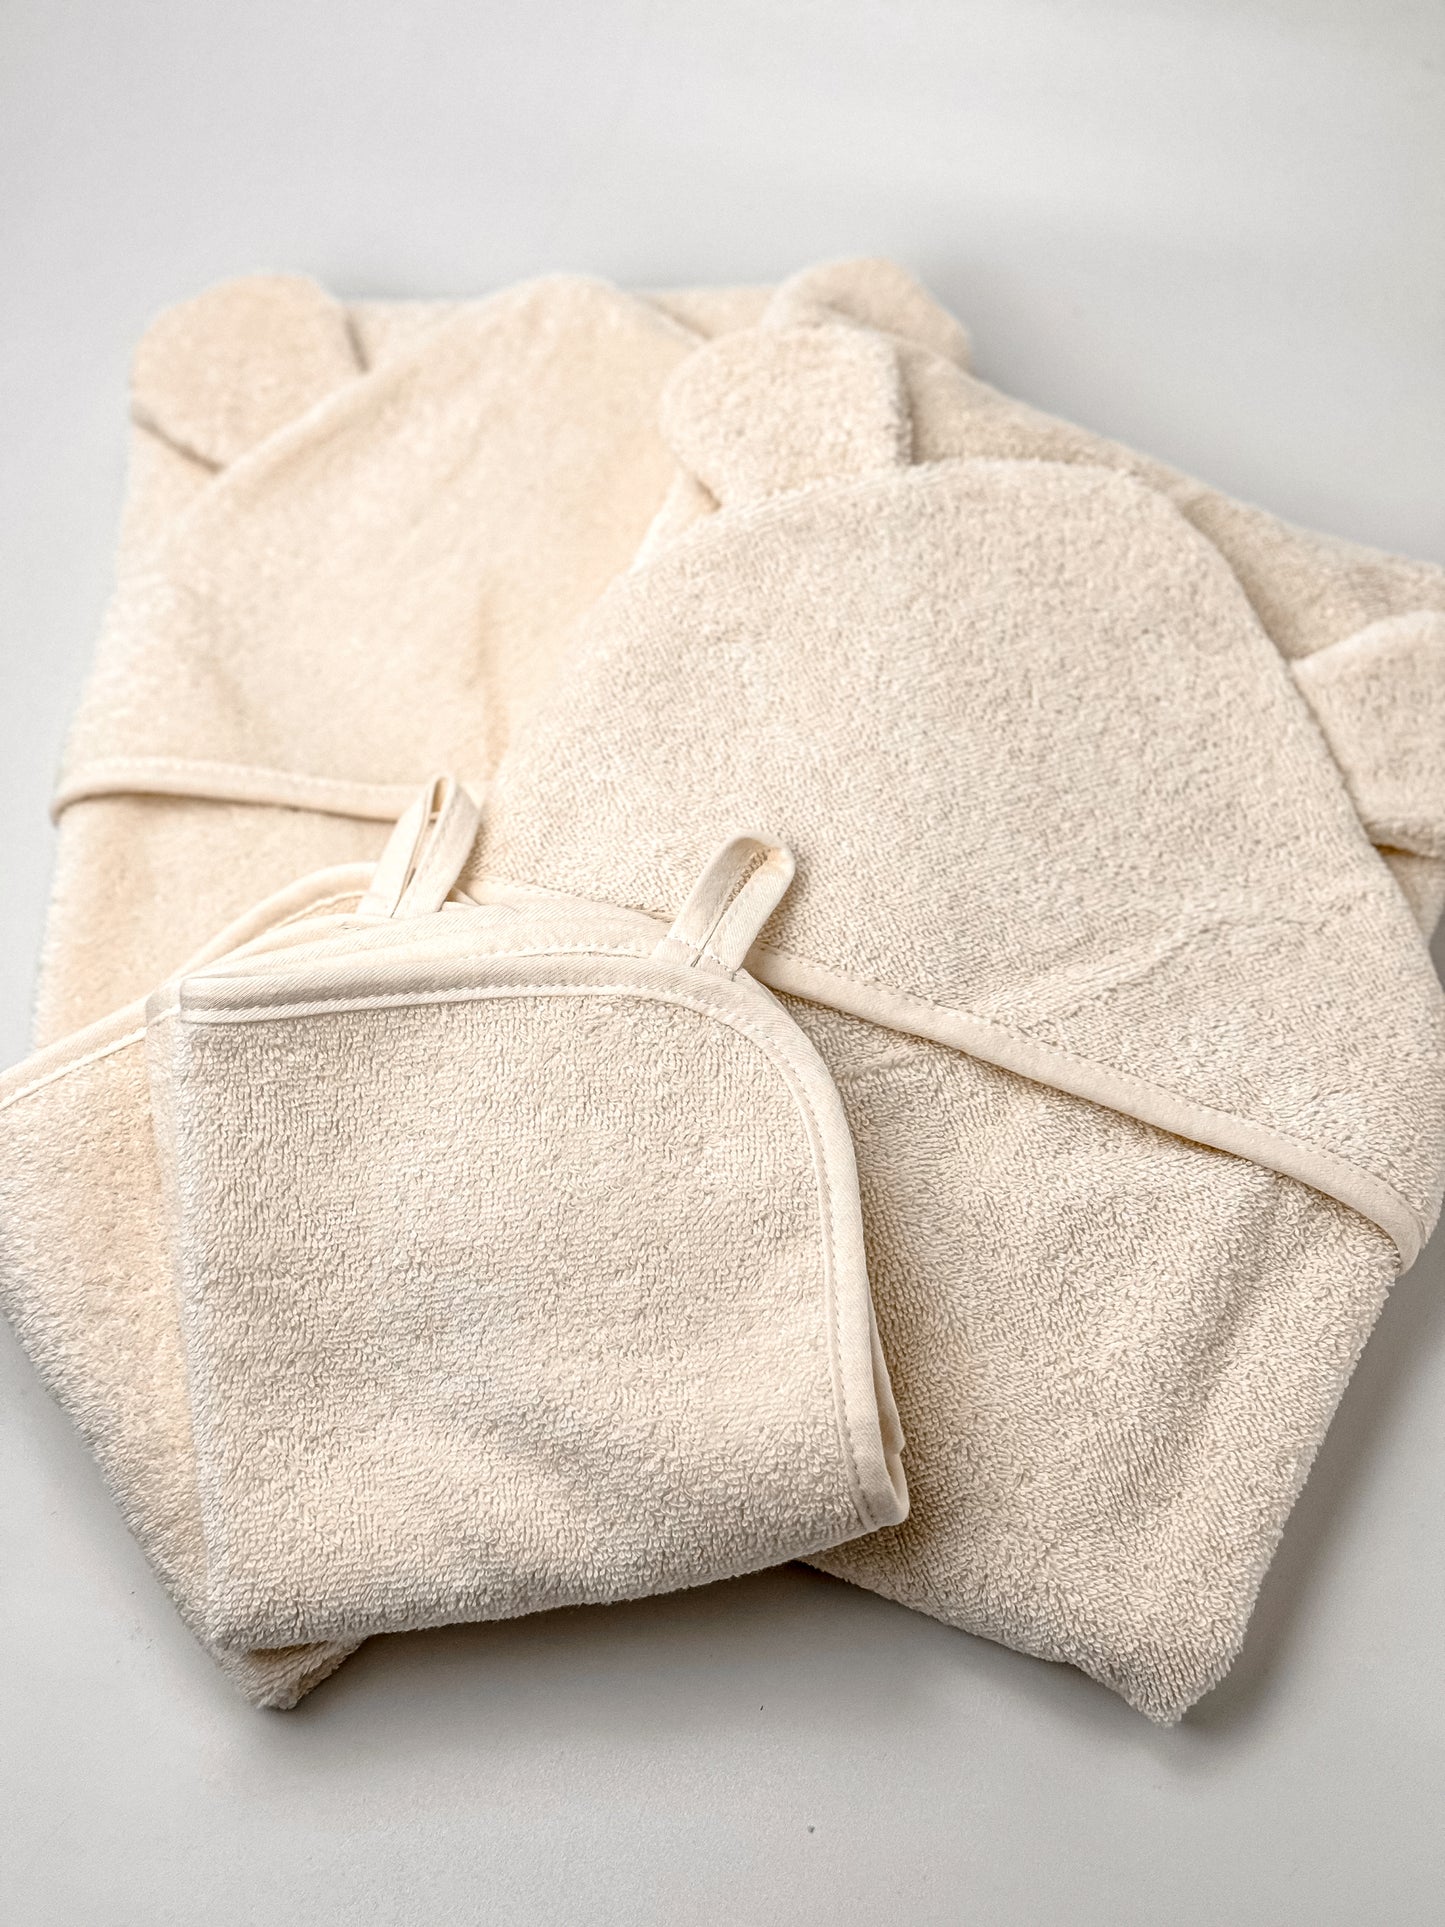 Hooded towel & washcloth set in cream color